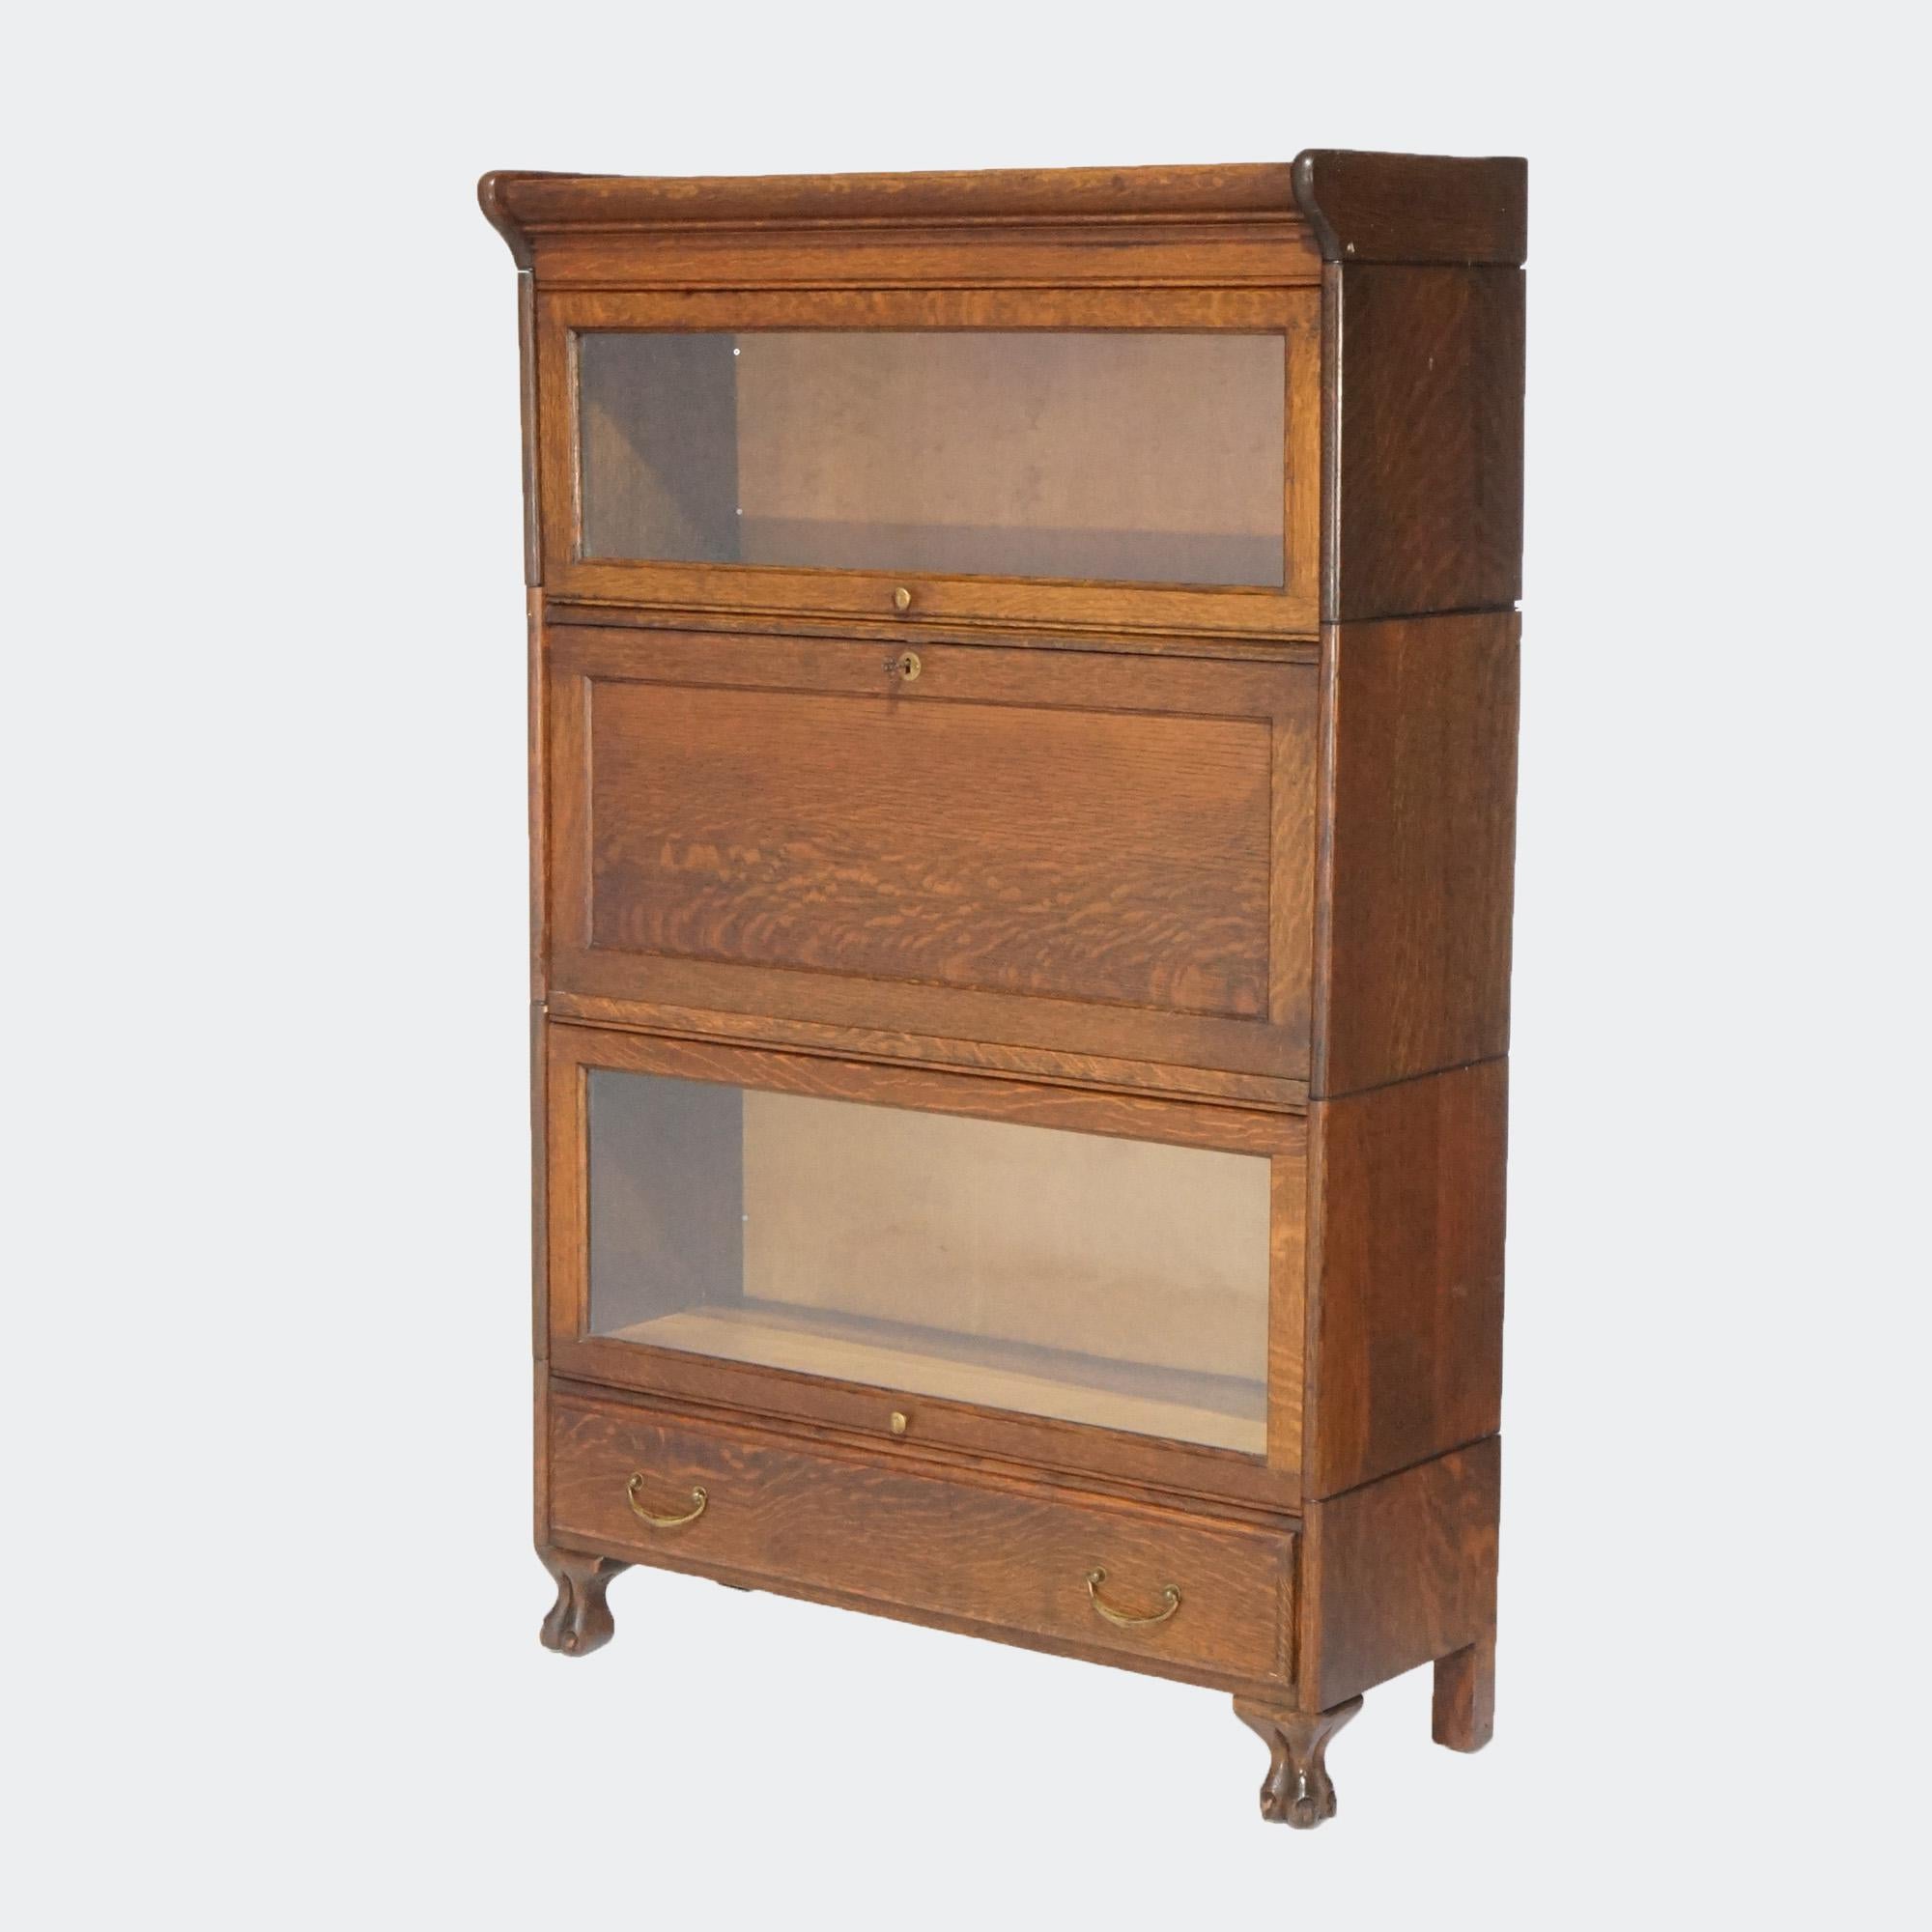 An antique Arts and Crafts barrister bookcase secretary offers quarter sawn oak construction with three stacks; tow having pull-out glass doors and the third with a drop down desk opening to compartmentalized interior; base with single long drawer